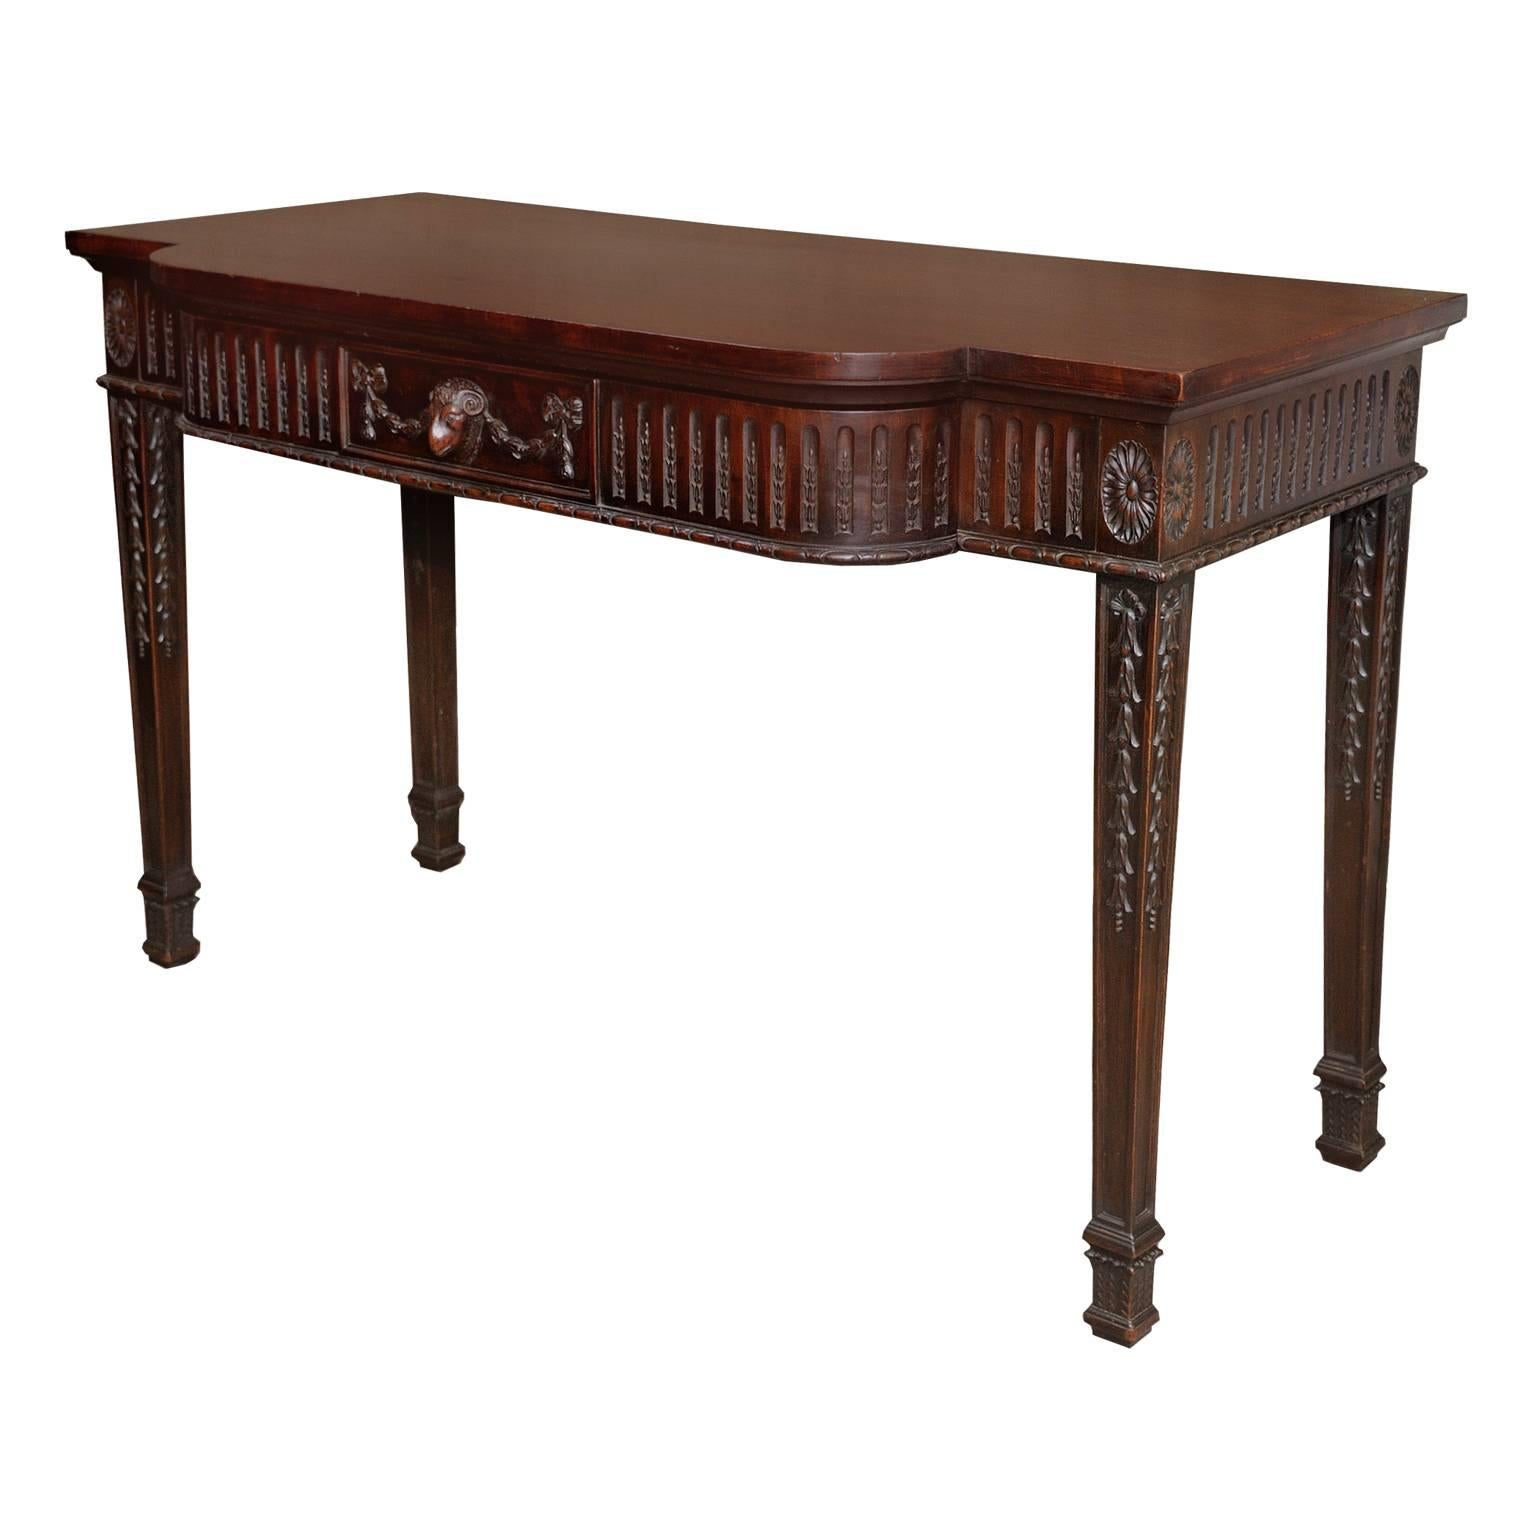 This very smart and beautifully made and finished, late 19th century mahogany serving or side table is attributed to Hicks of Dublin.

It comes complete with a Brass London retailers Label for Druce &Co, Baker Street, London NW, Second Hand